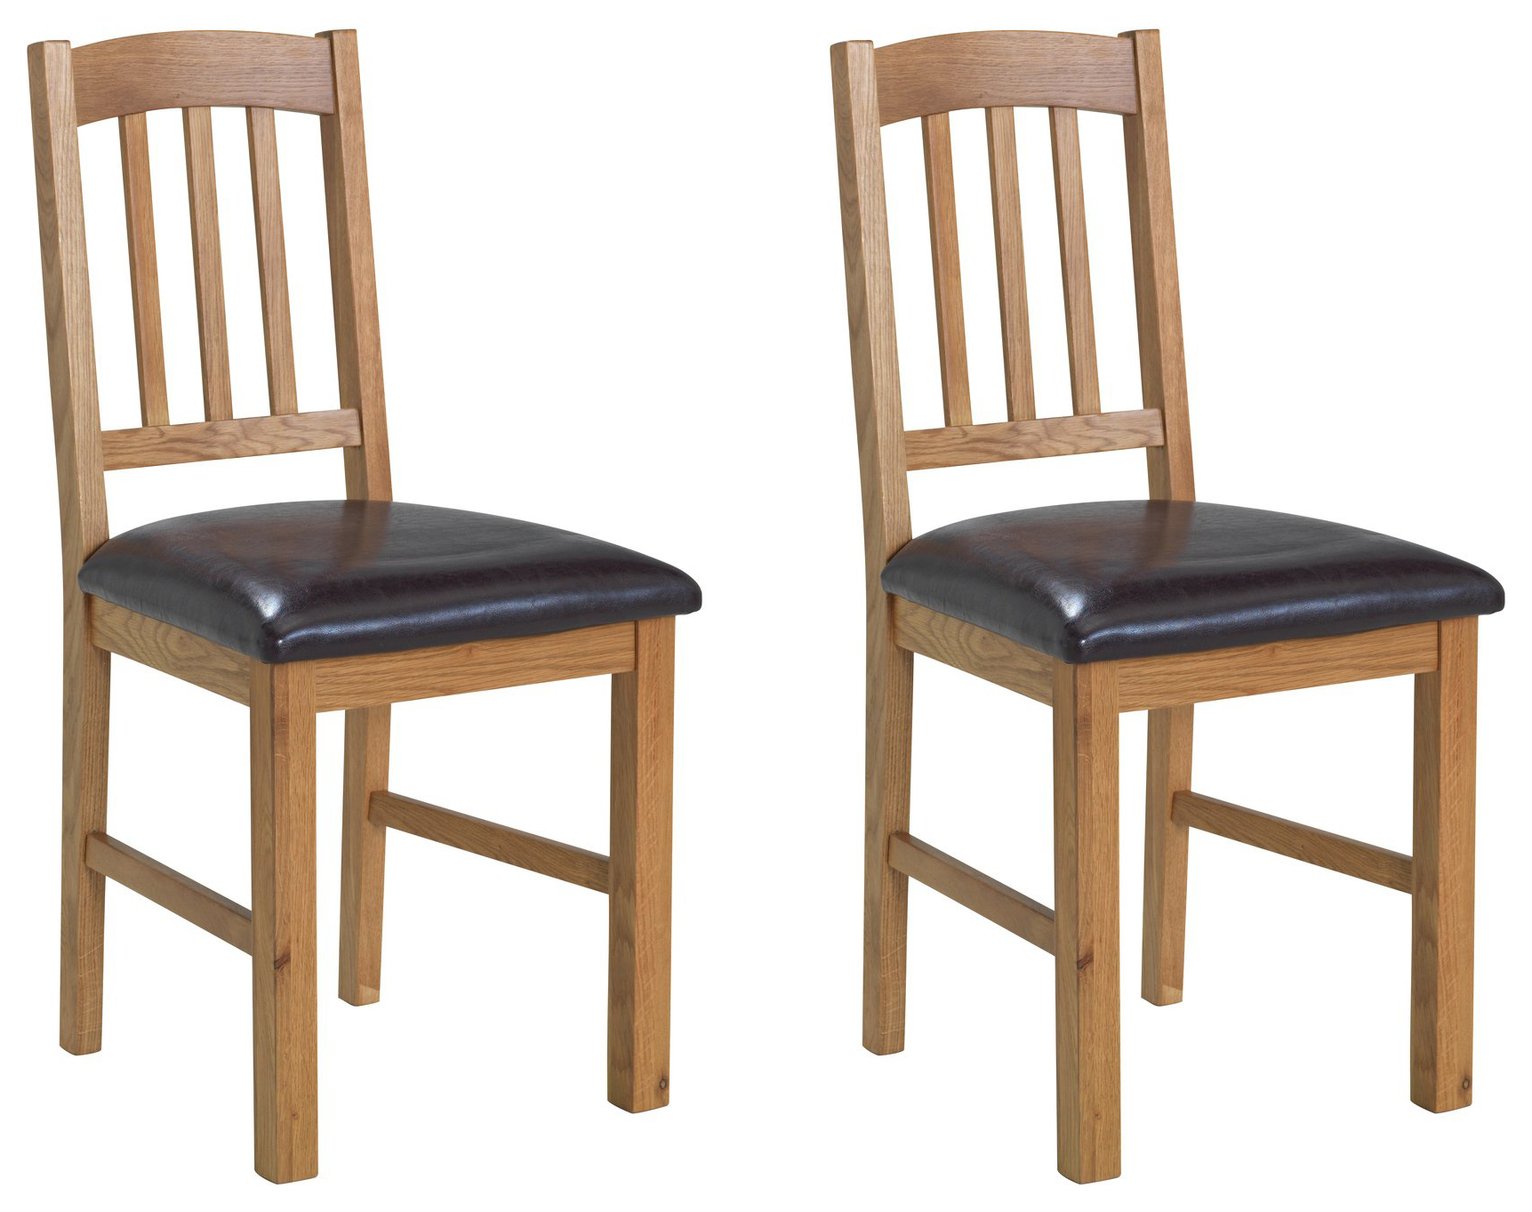 Pair of Schreiber Harbury Slatted Dining Chairs